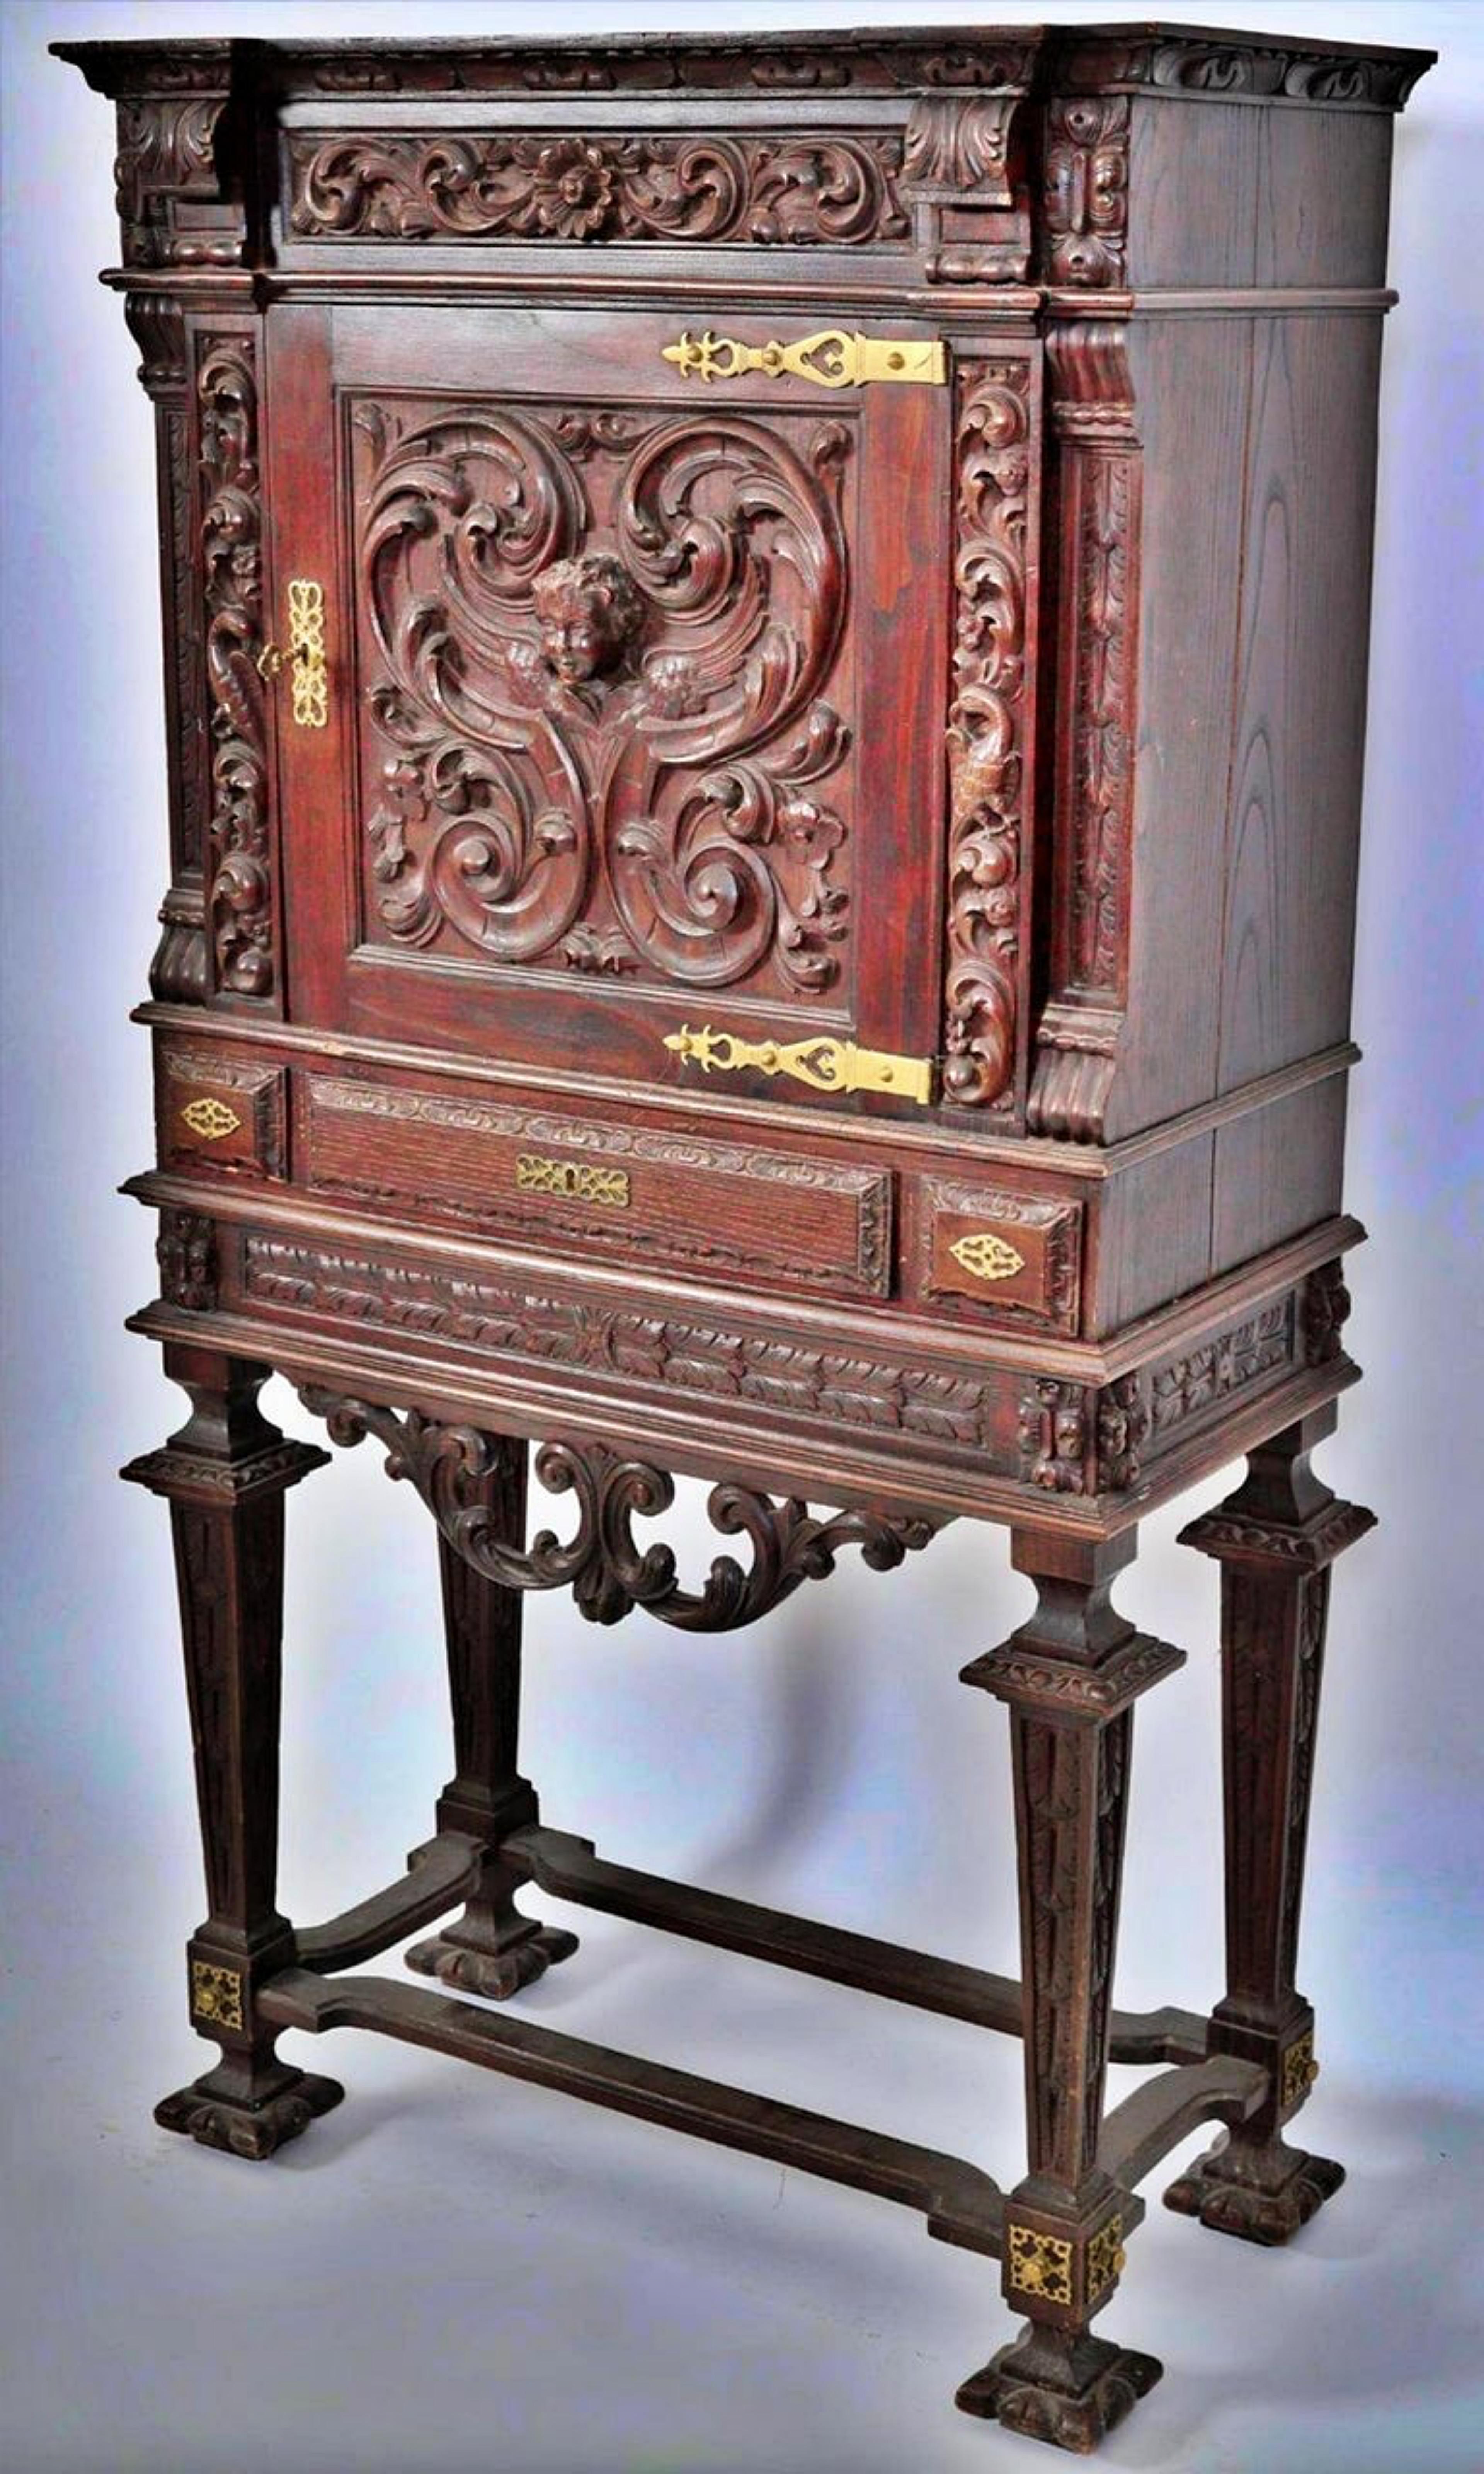 Cabinet

To the renaissance taste
Walnut with carvings
Architecturally shaped with one door and three drawers, interior with shelf, yellow metal hardware, decoration with floral scrolls and busts
Portuguese
End of century XIX

Dimensions: - 150 x 81